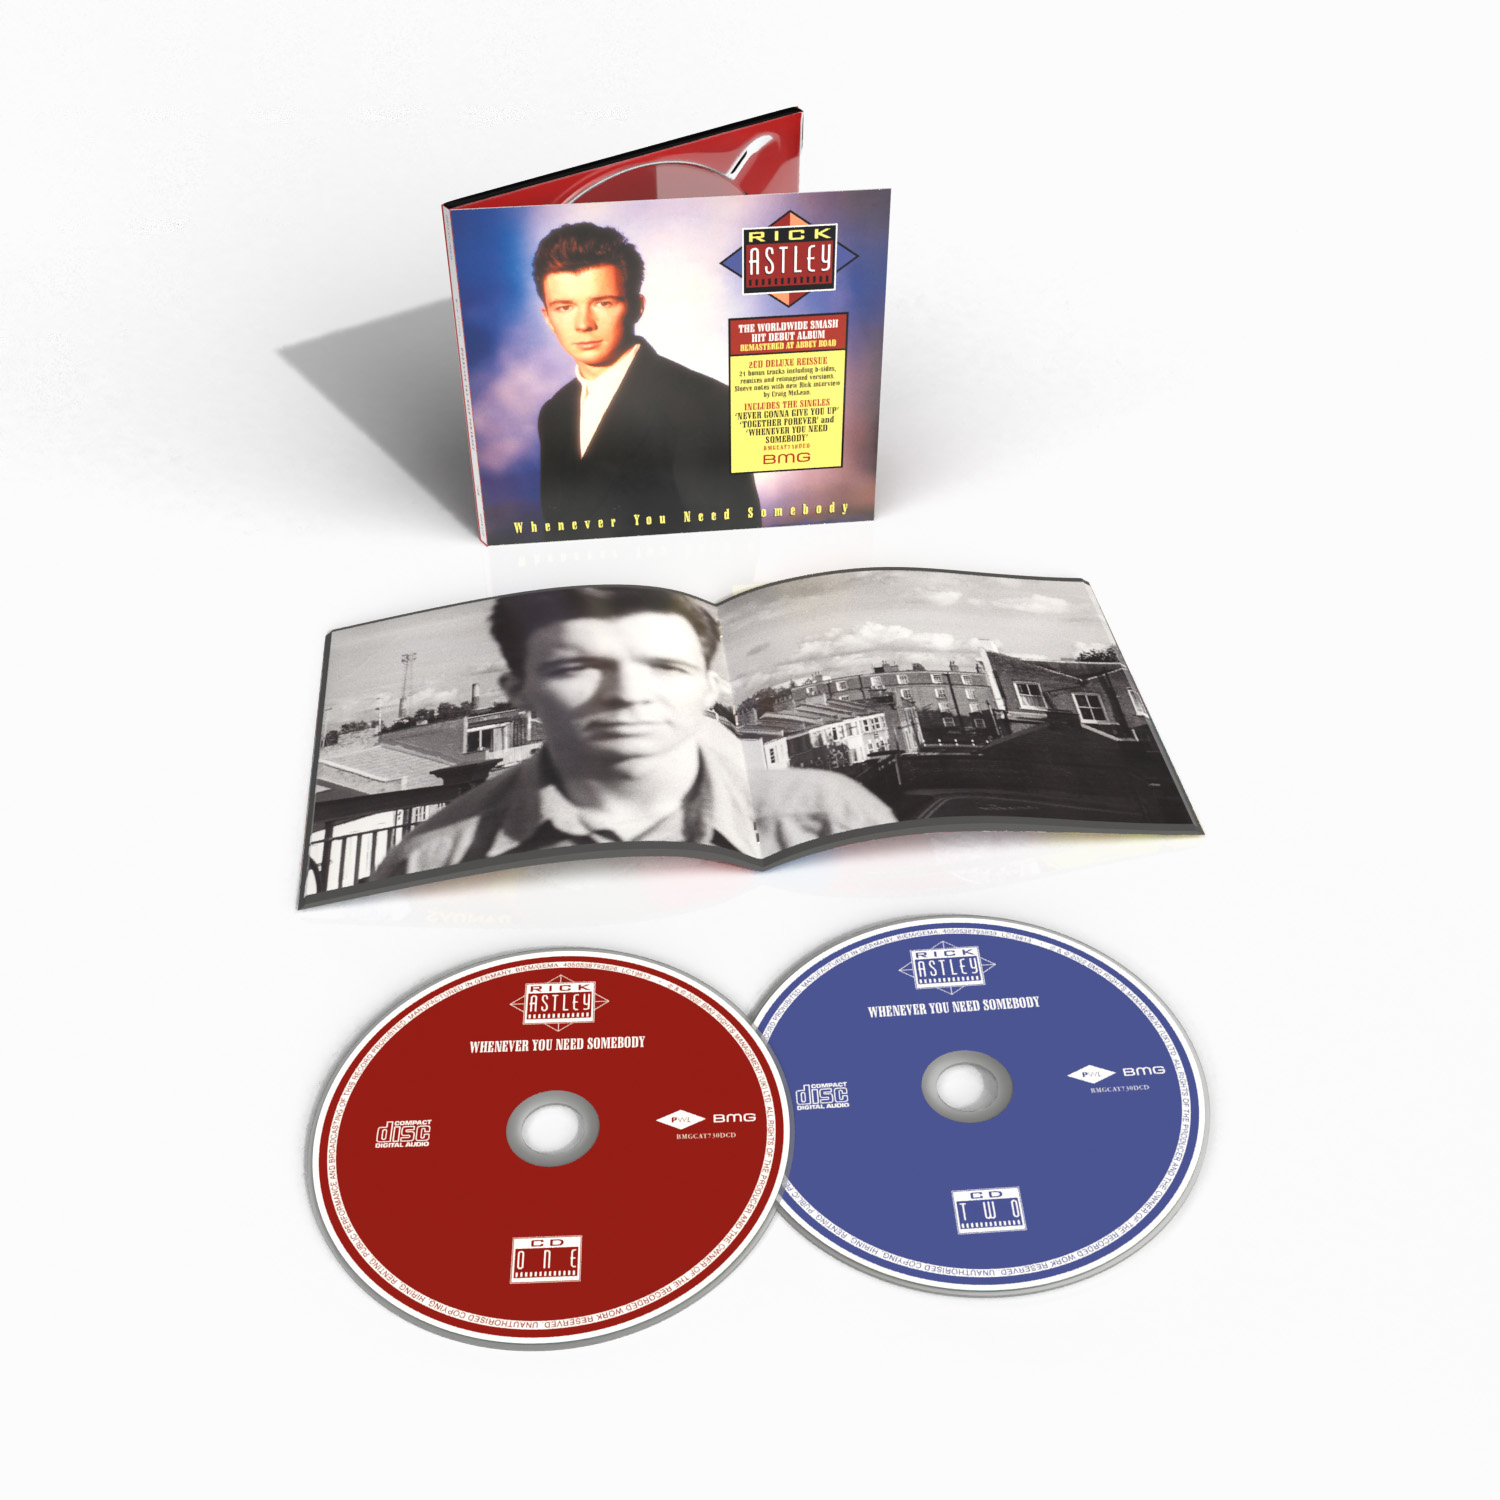 Rick Astley, Whenever You Need Somebody (Deluxe Edition), CD